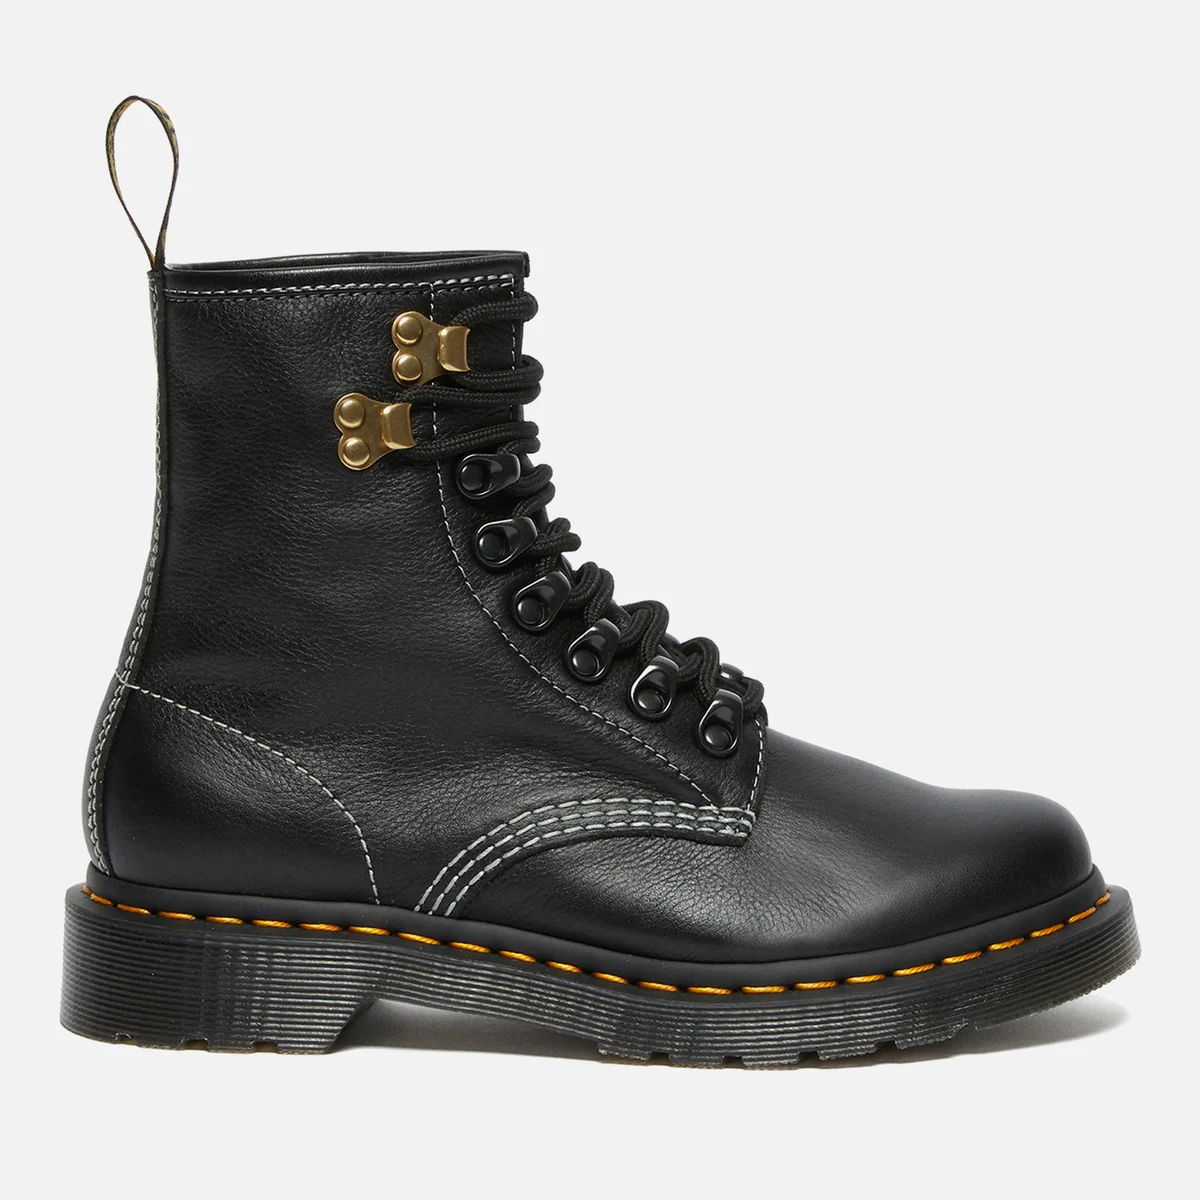 Dr. Martens 1460 Hardware Virginia Leather Boots Image 1